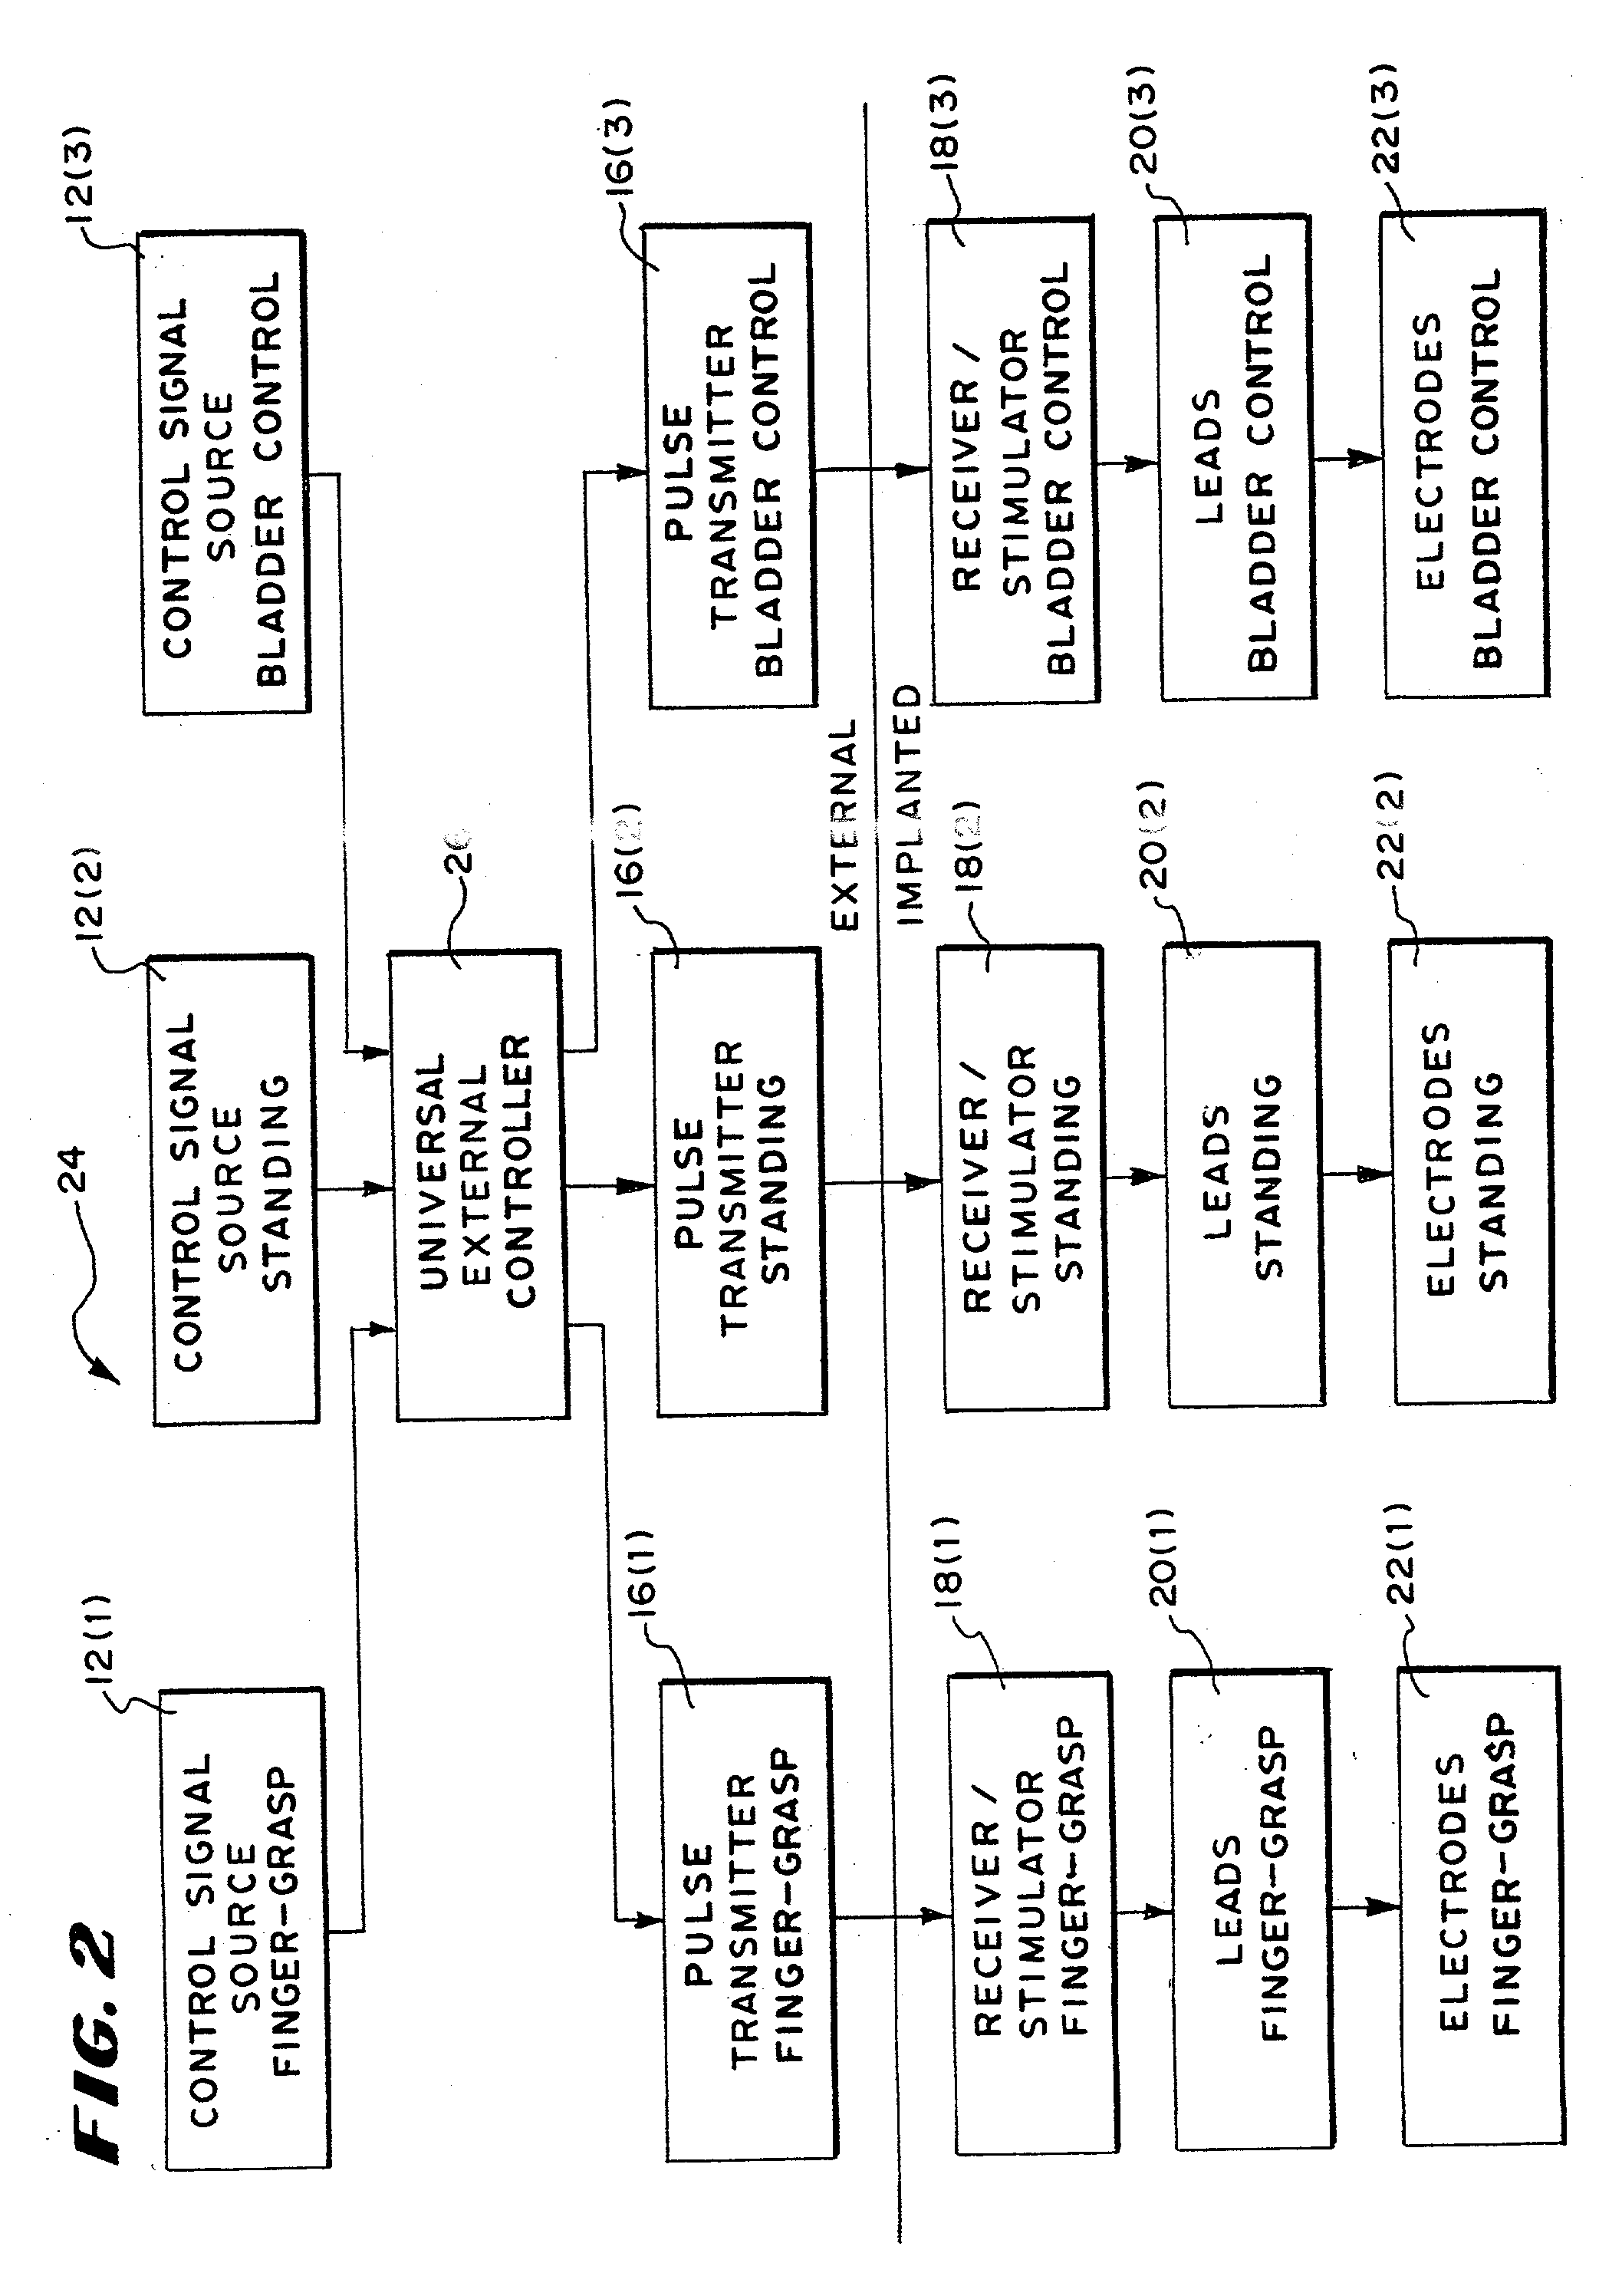 Systems and methods for performing prosthetic or therapeutic neuromuscular stimulation using a universal external controller accommodating different control inputs and/or different control outputs